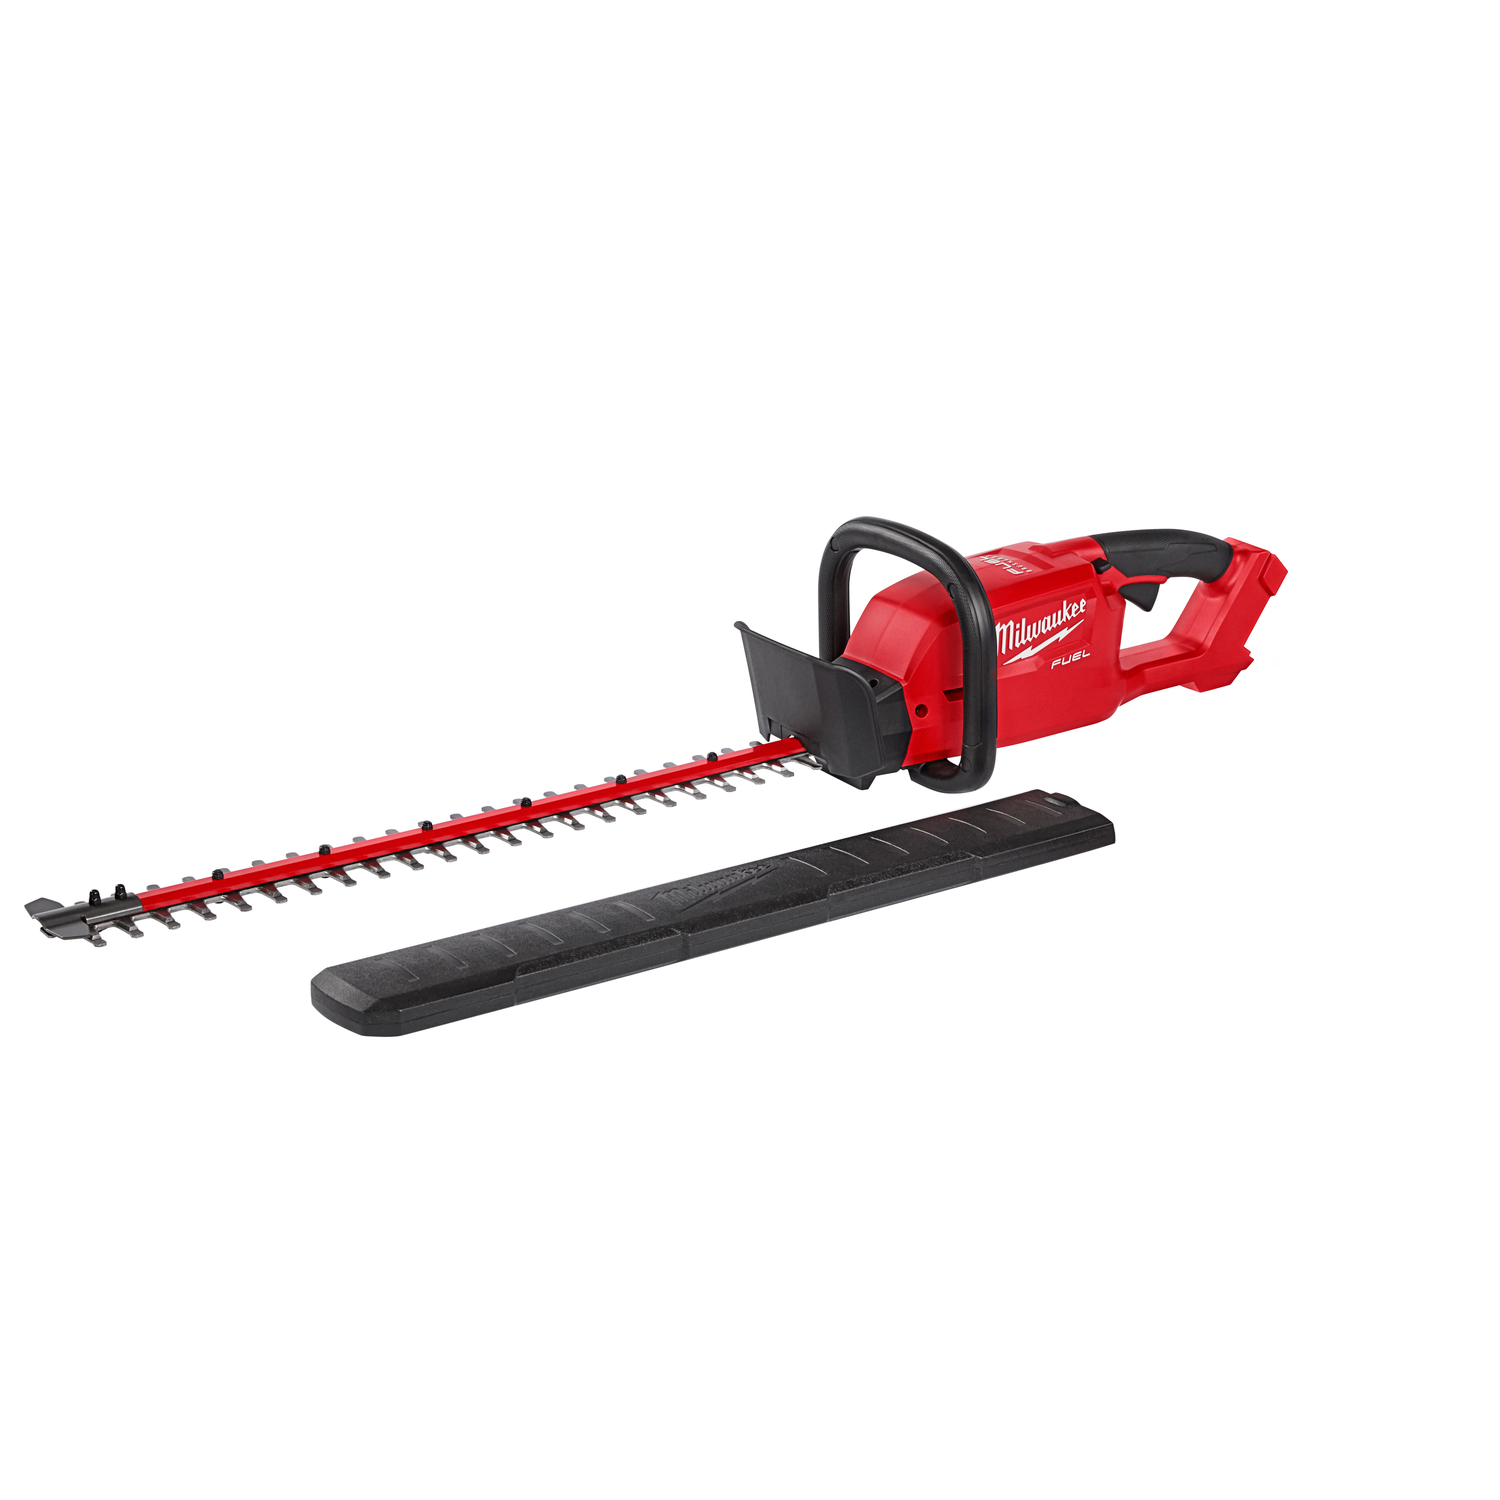 cordless hedge trimmer lowe's